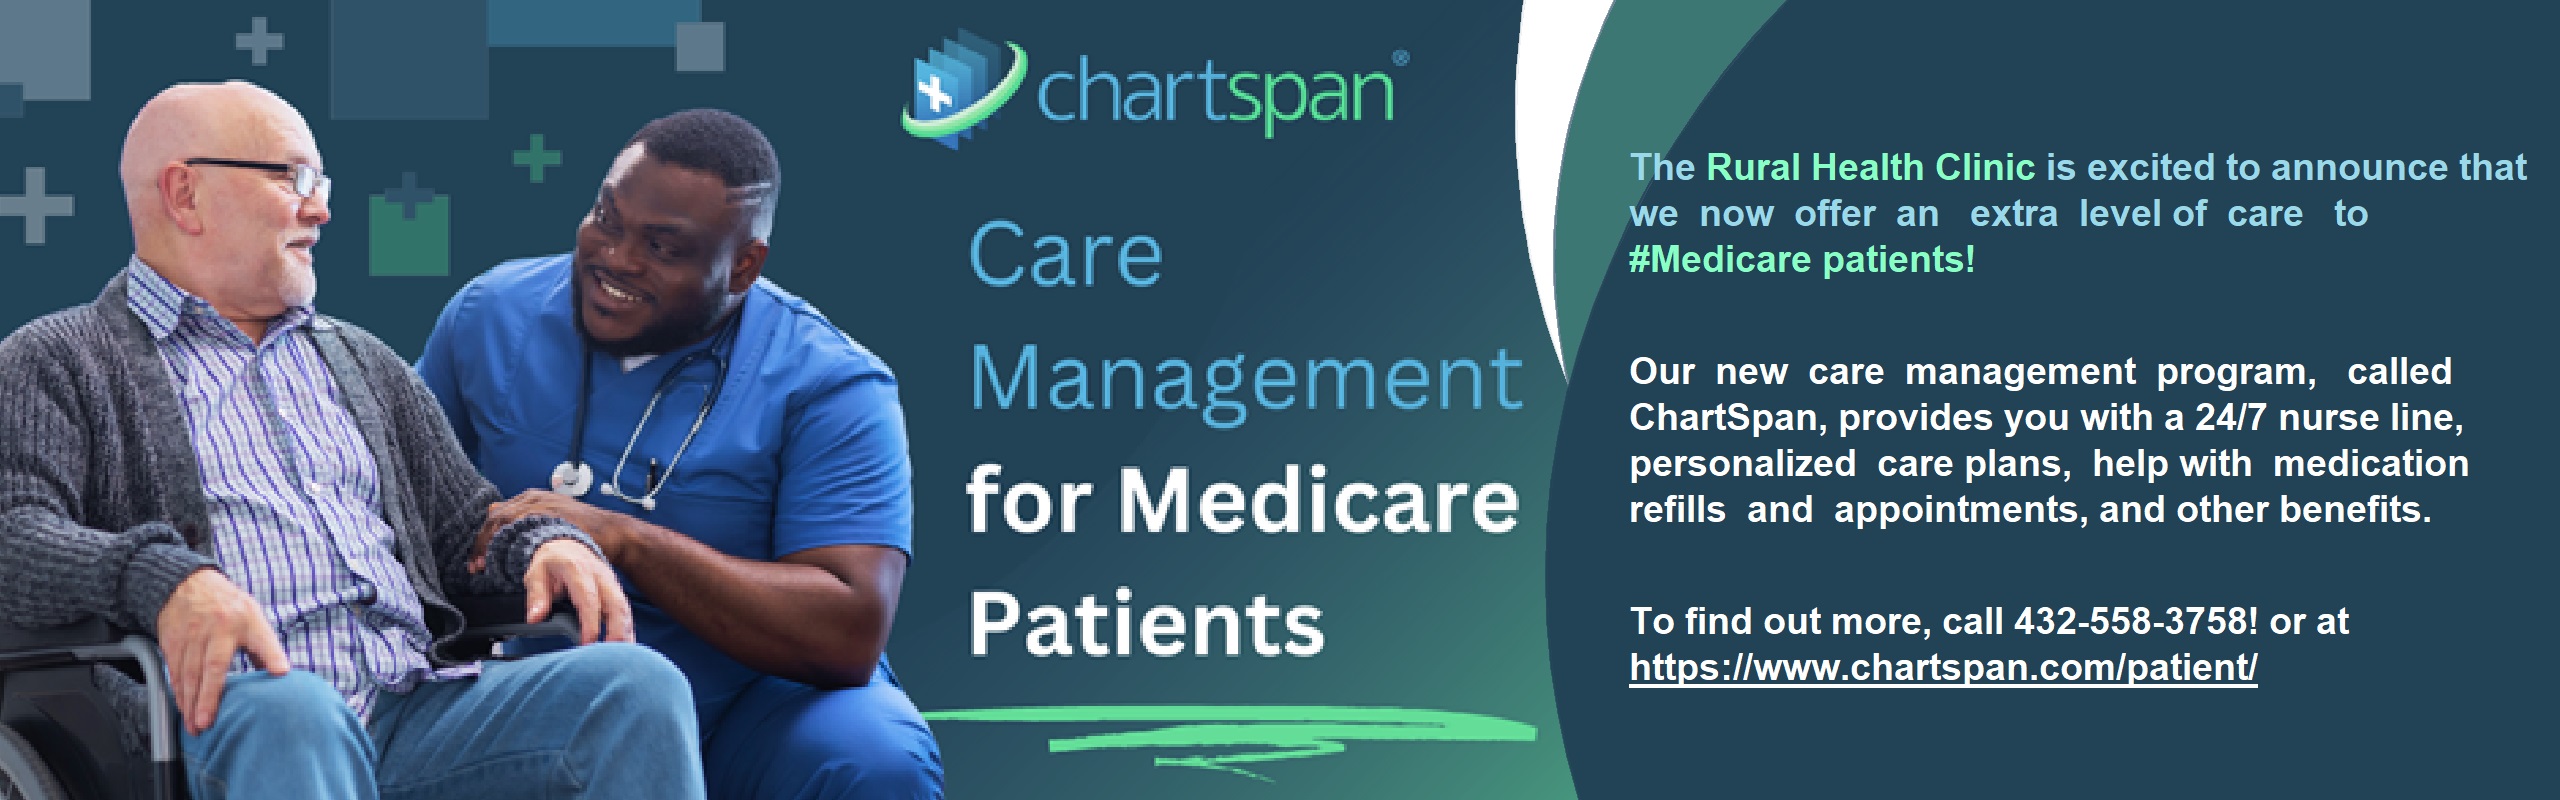 The Rural Health Clinic is excited to announce that we now offer an extra level of care to #Medicare patients! Our new care management program, called ChartSpan, provides you with a 24/7 nurse line, personalized care plans, help with medication refills and appointments, and other benefits. To find out more, call 432-558-3758! Or at https://www.chartspan.com/patient/